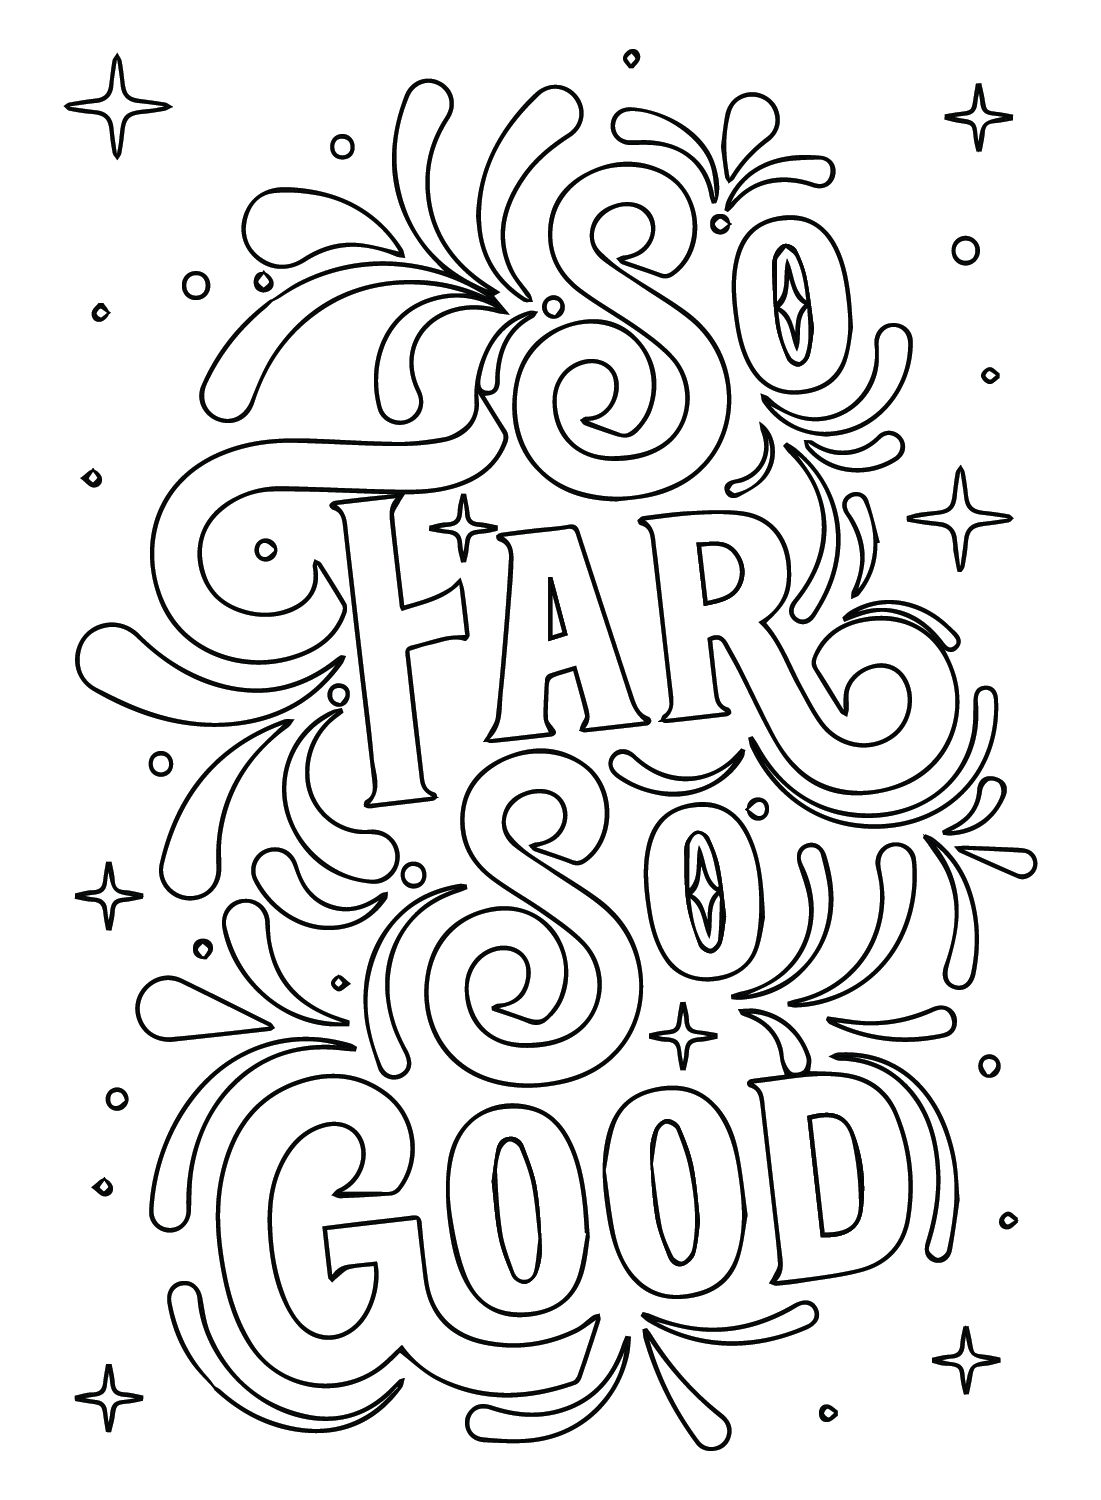 Inspiration Quotes Coloring Page